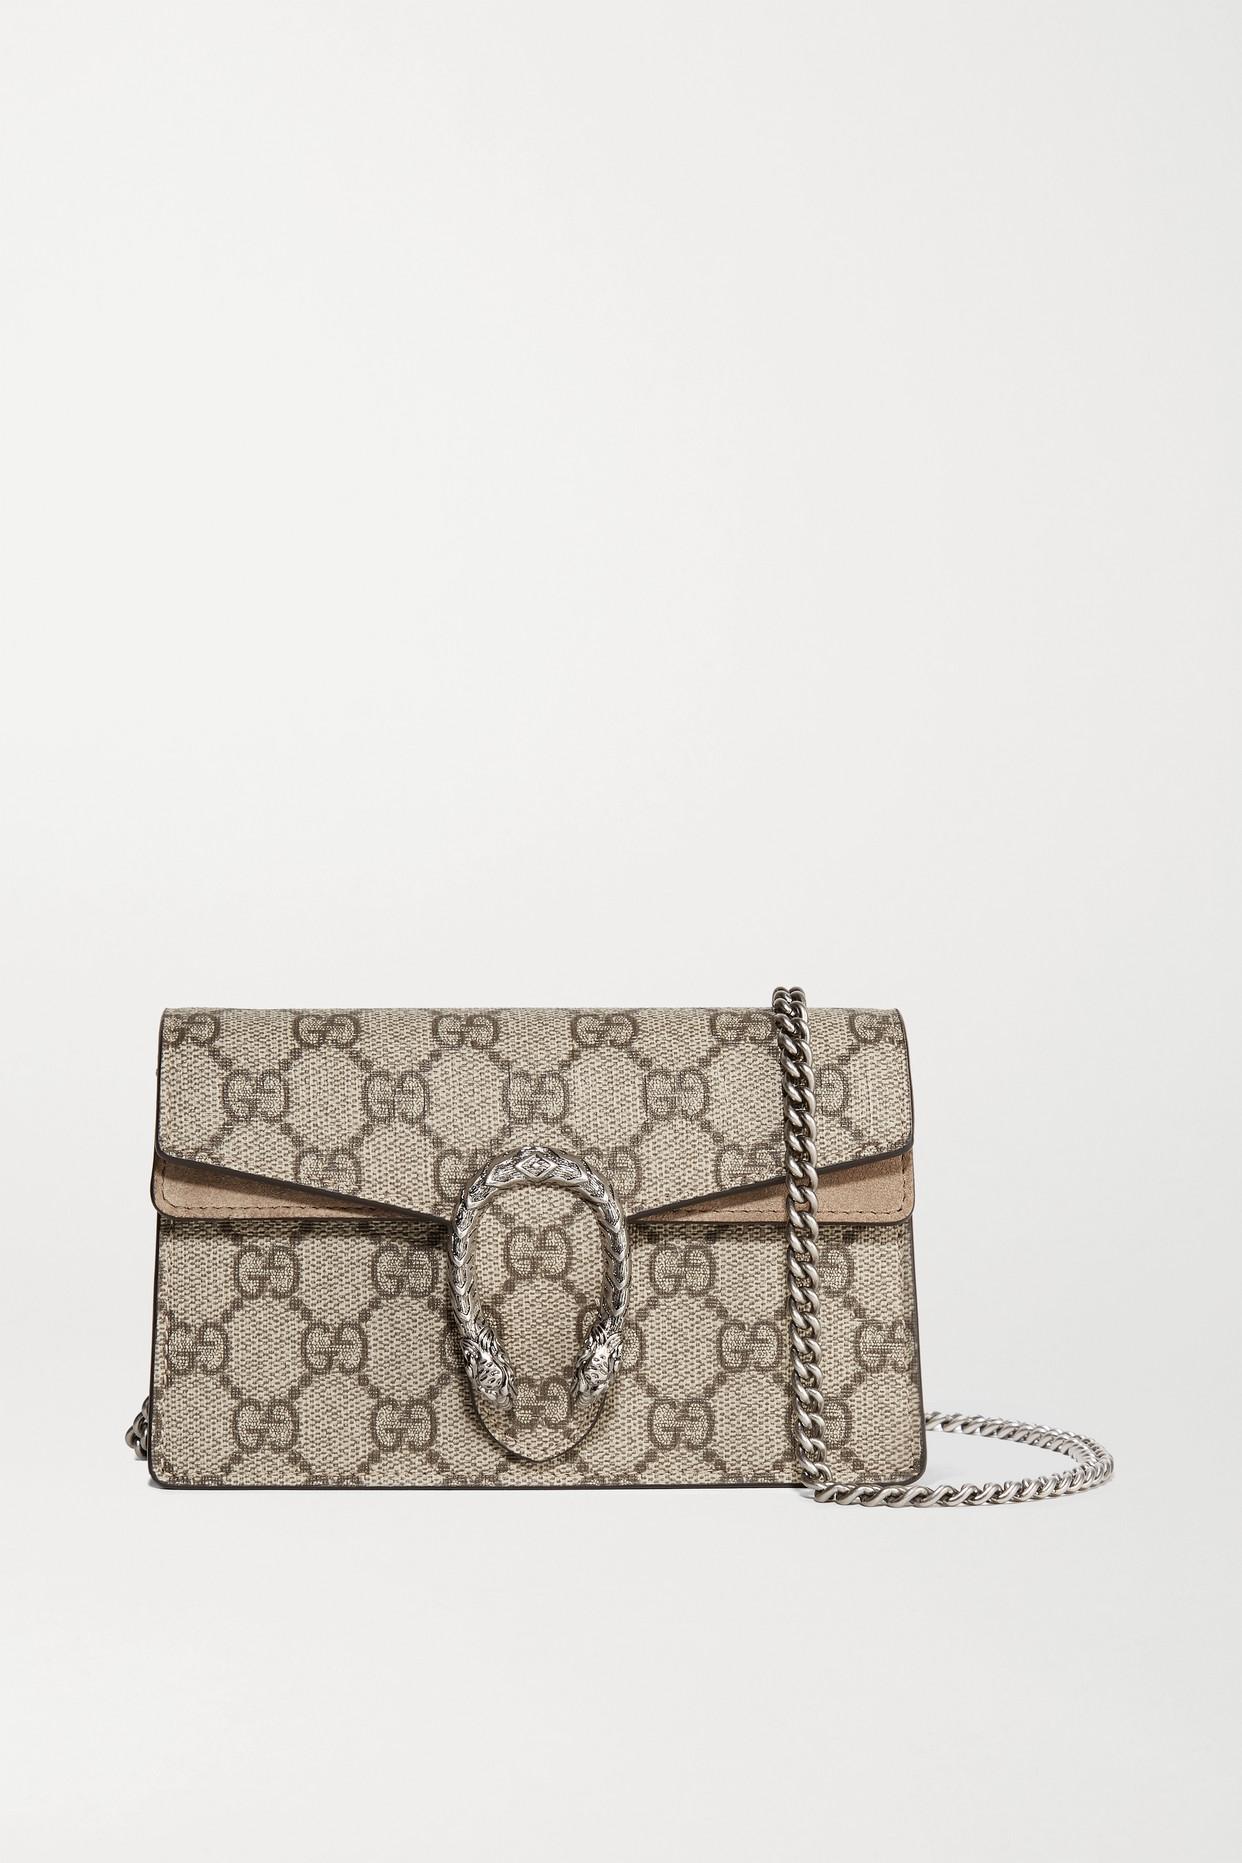 Gucci Dionysus Super Mini Printed Coated-canvas And Suede Shoulder Bag -  Save 36% - Lyst